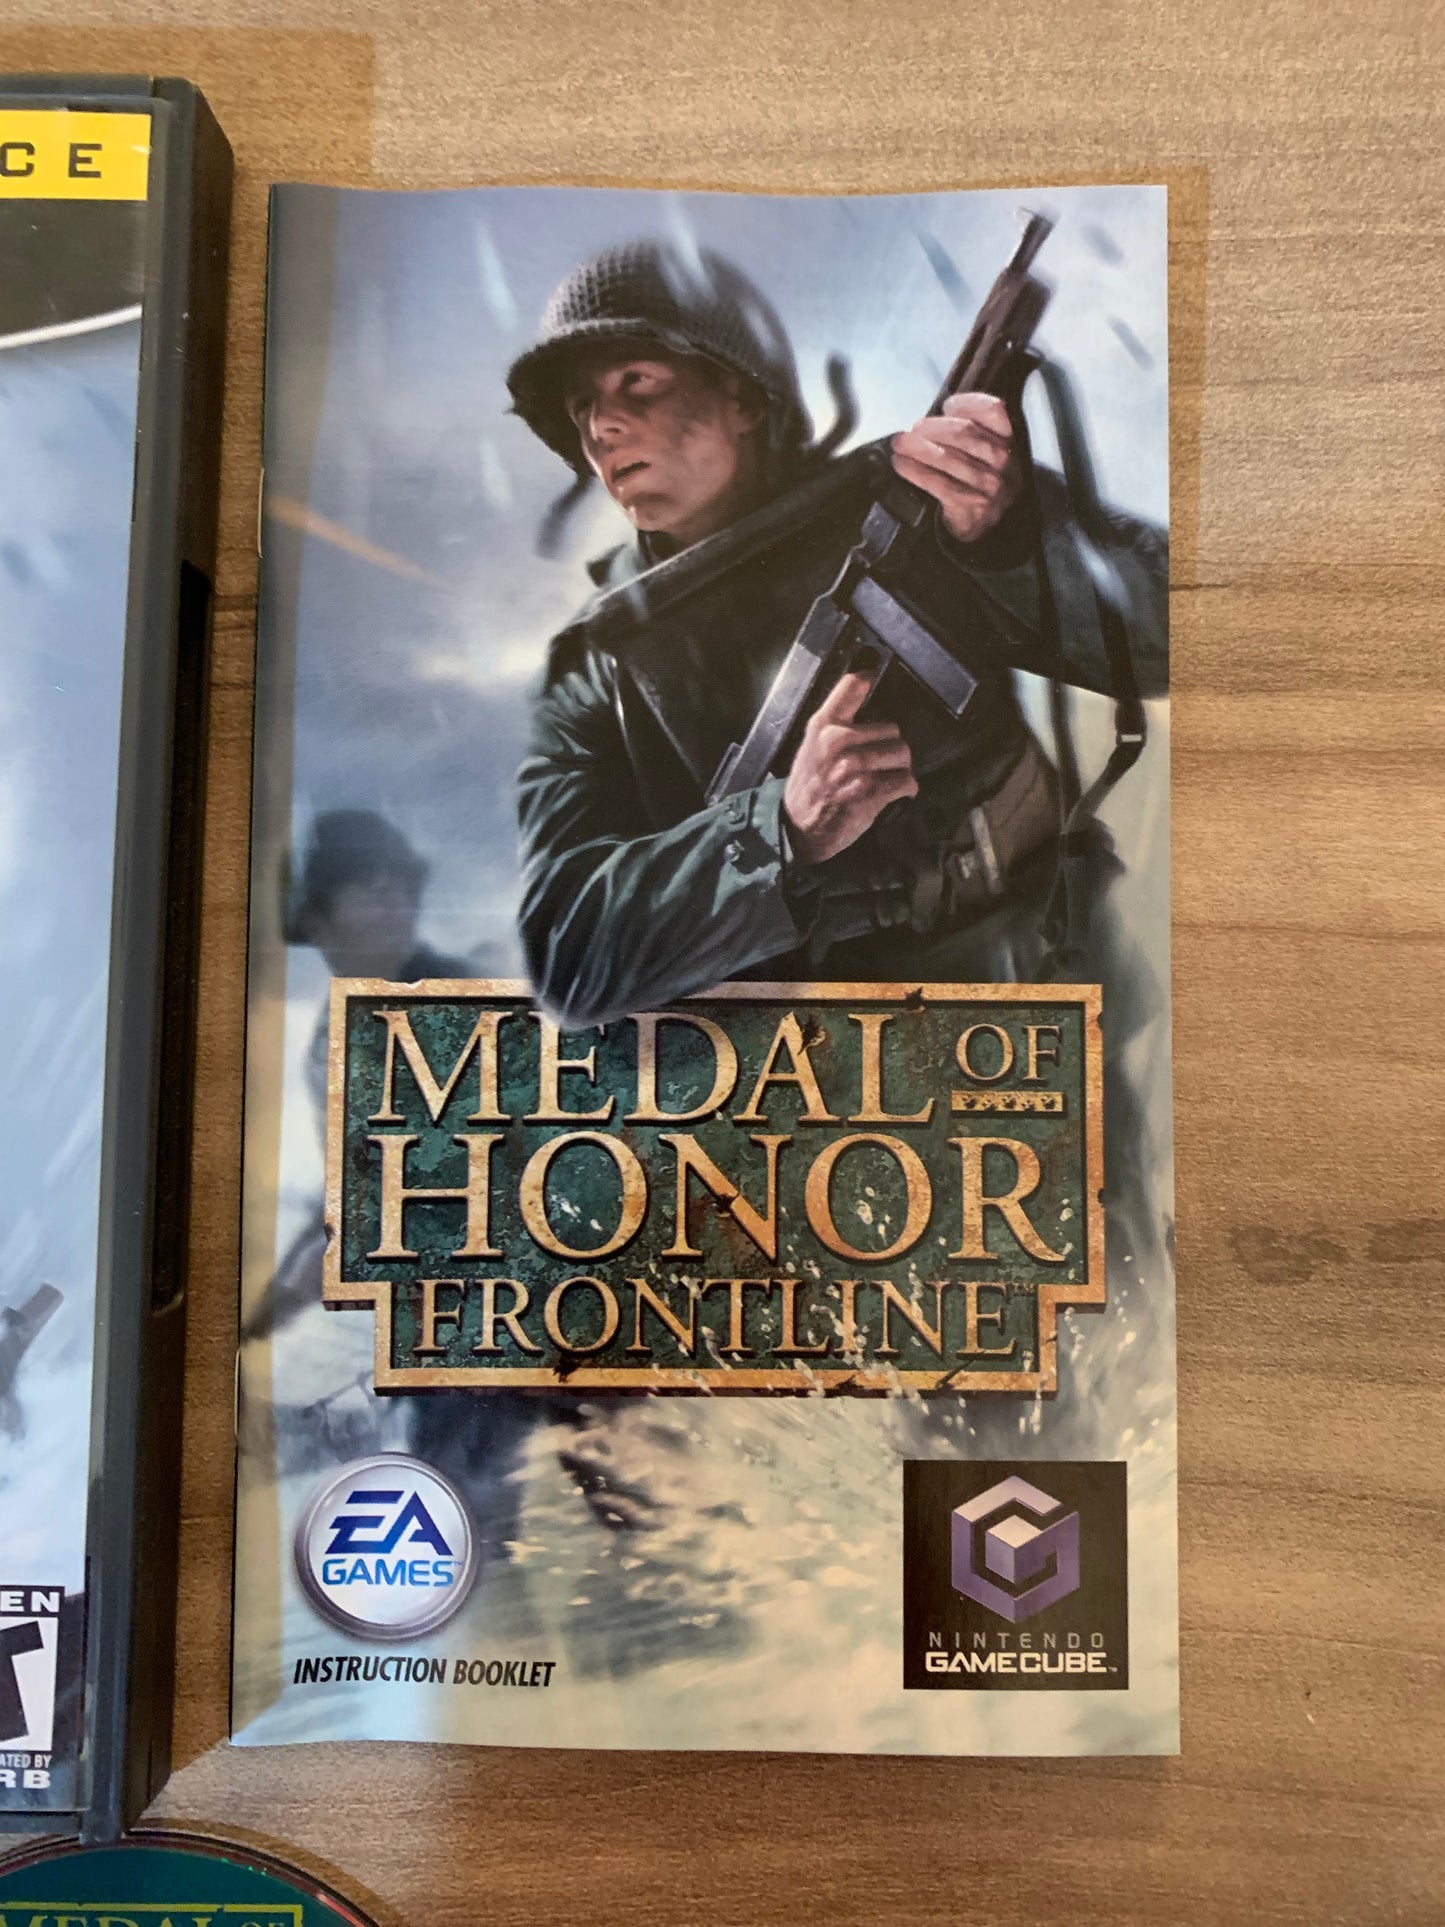 NiNTENDO GAMECUBE [NGC] | MEDAL OF HONOR FRONTLiNE | PLAYERS CHOiCE